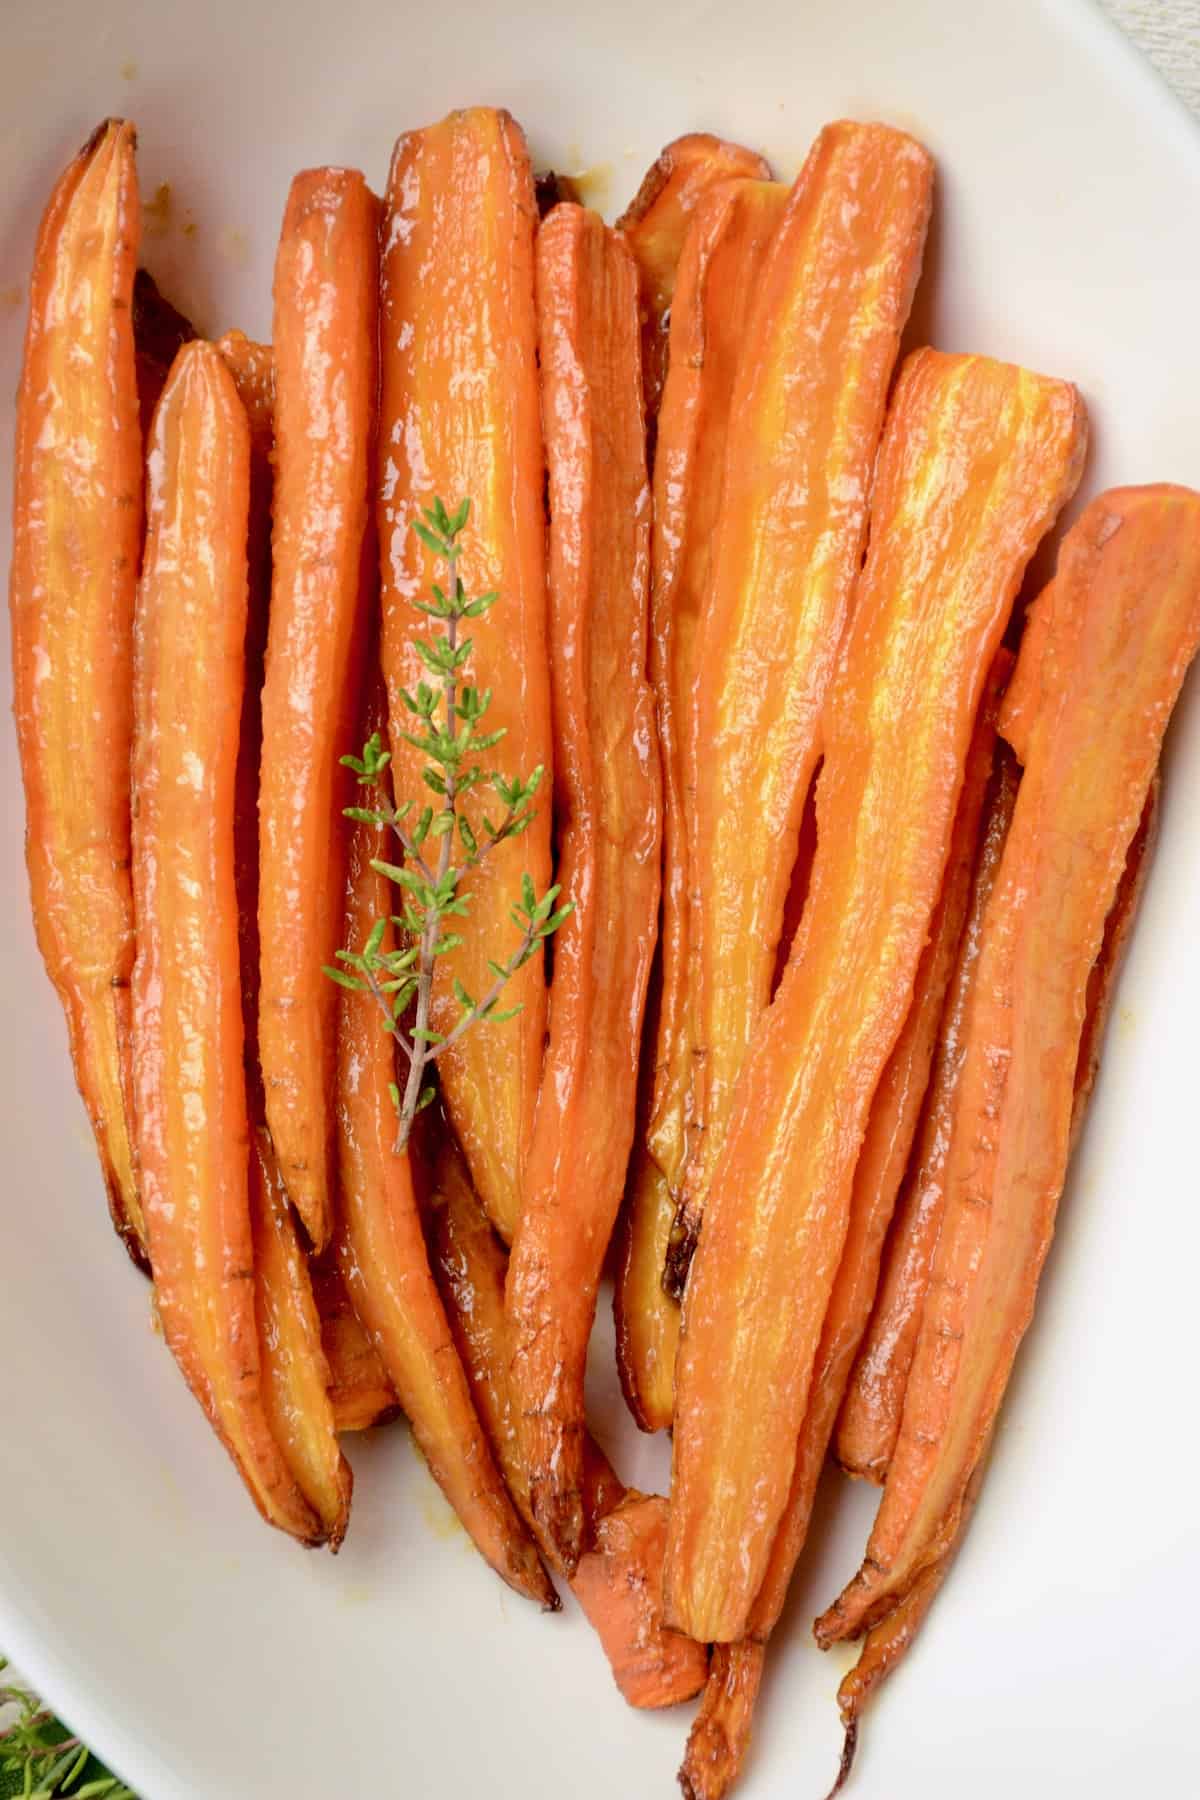 Glazed carrots in a serving dish with a twig of fresh thyme.